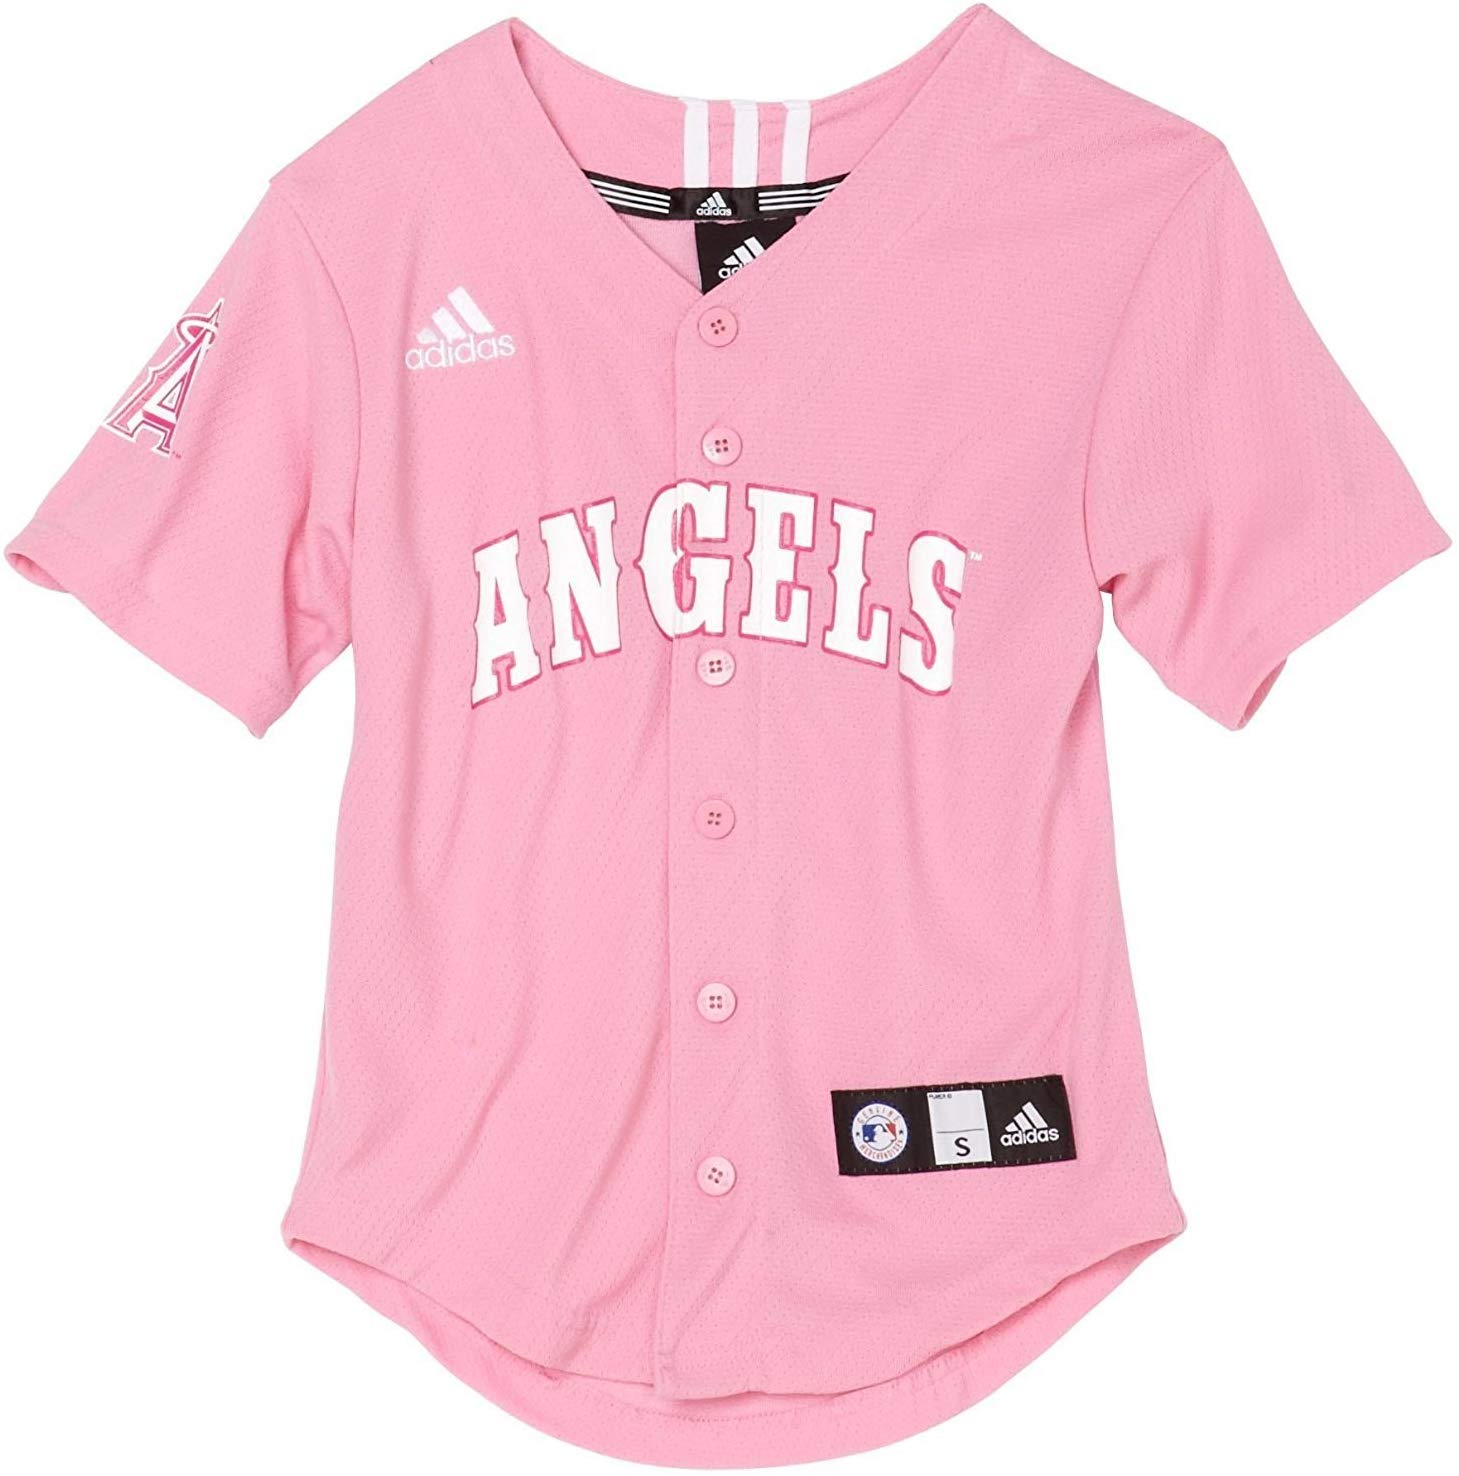 pink angels jersey